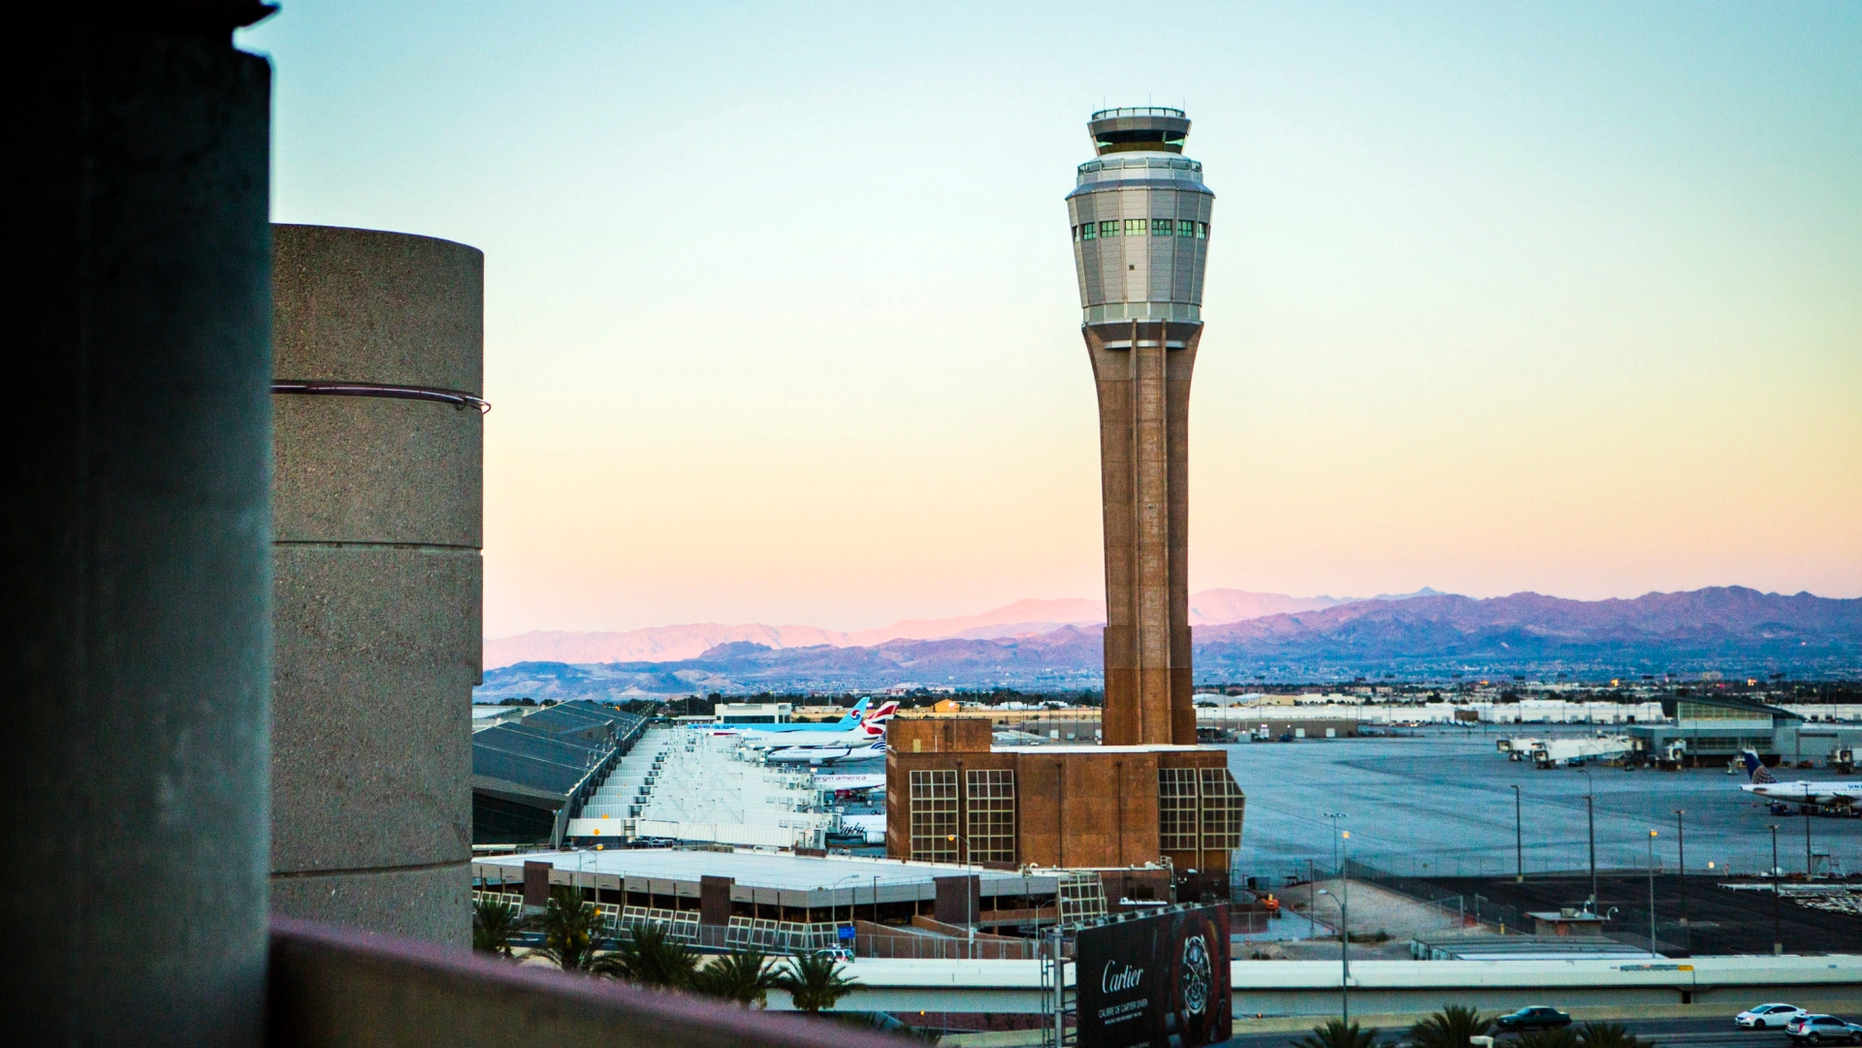 Federal authorities and airports announced Friday that they were investigating the reasons why an air traffic controller became incapacitated and was silent while working alone at night in the McCarran International Airport Tower. animated, in Las Vegas. (Jeff Scheid / Las Vegas Review via AP, File)